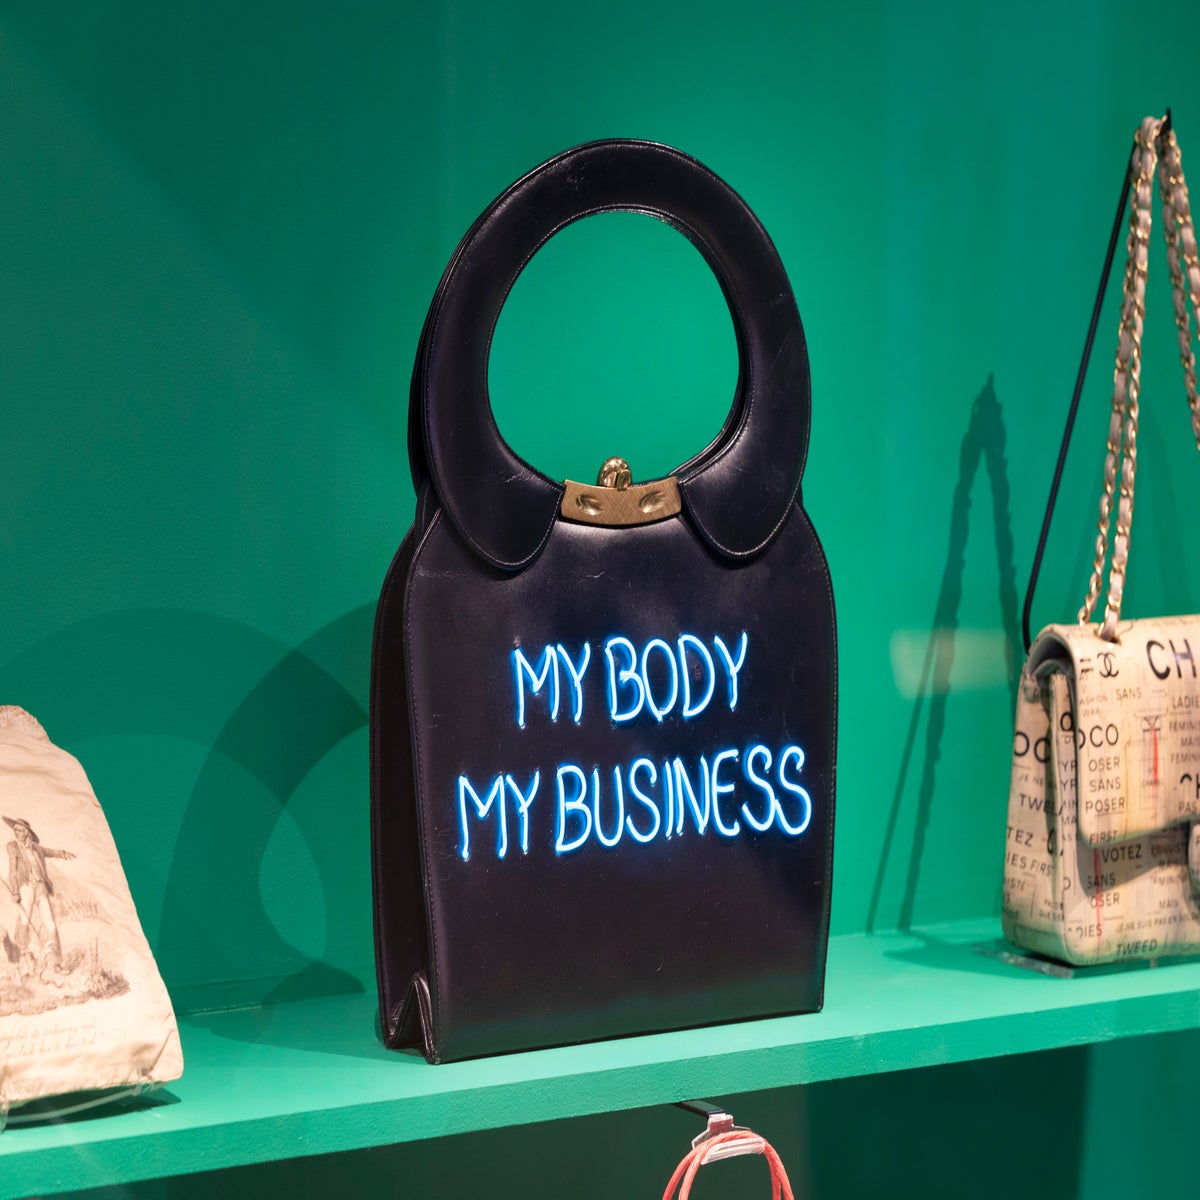 Bags: Inside Out Exhibition